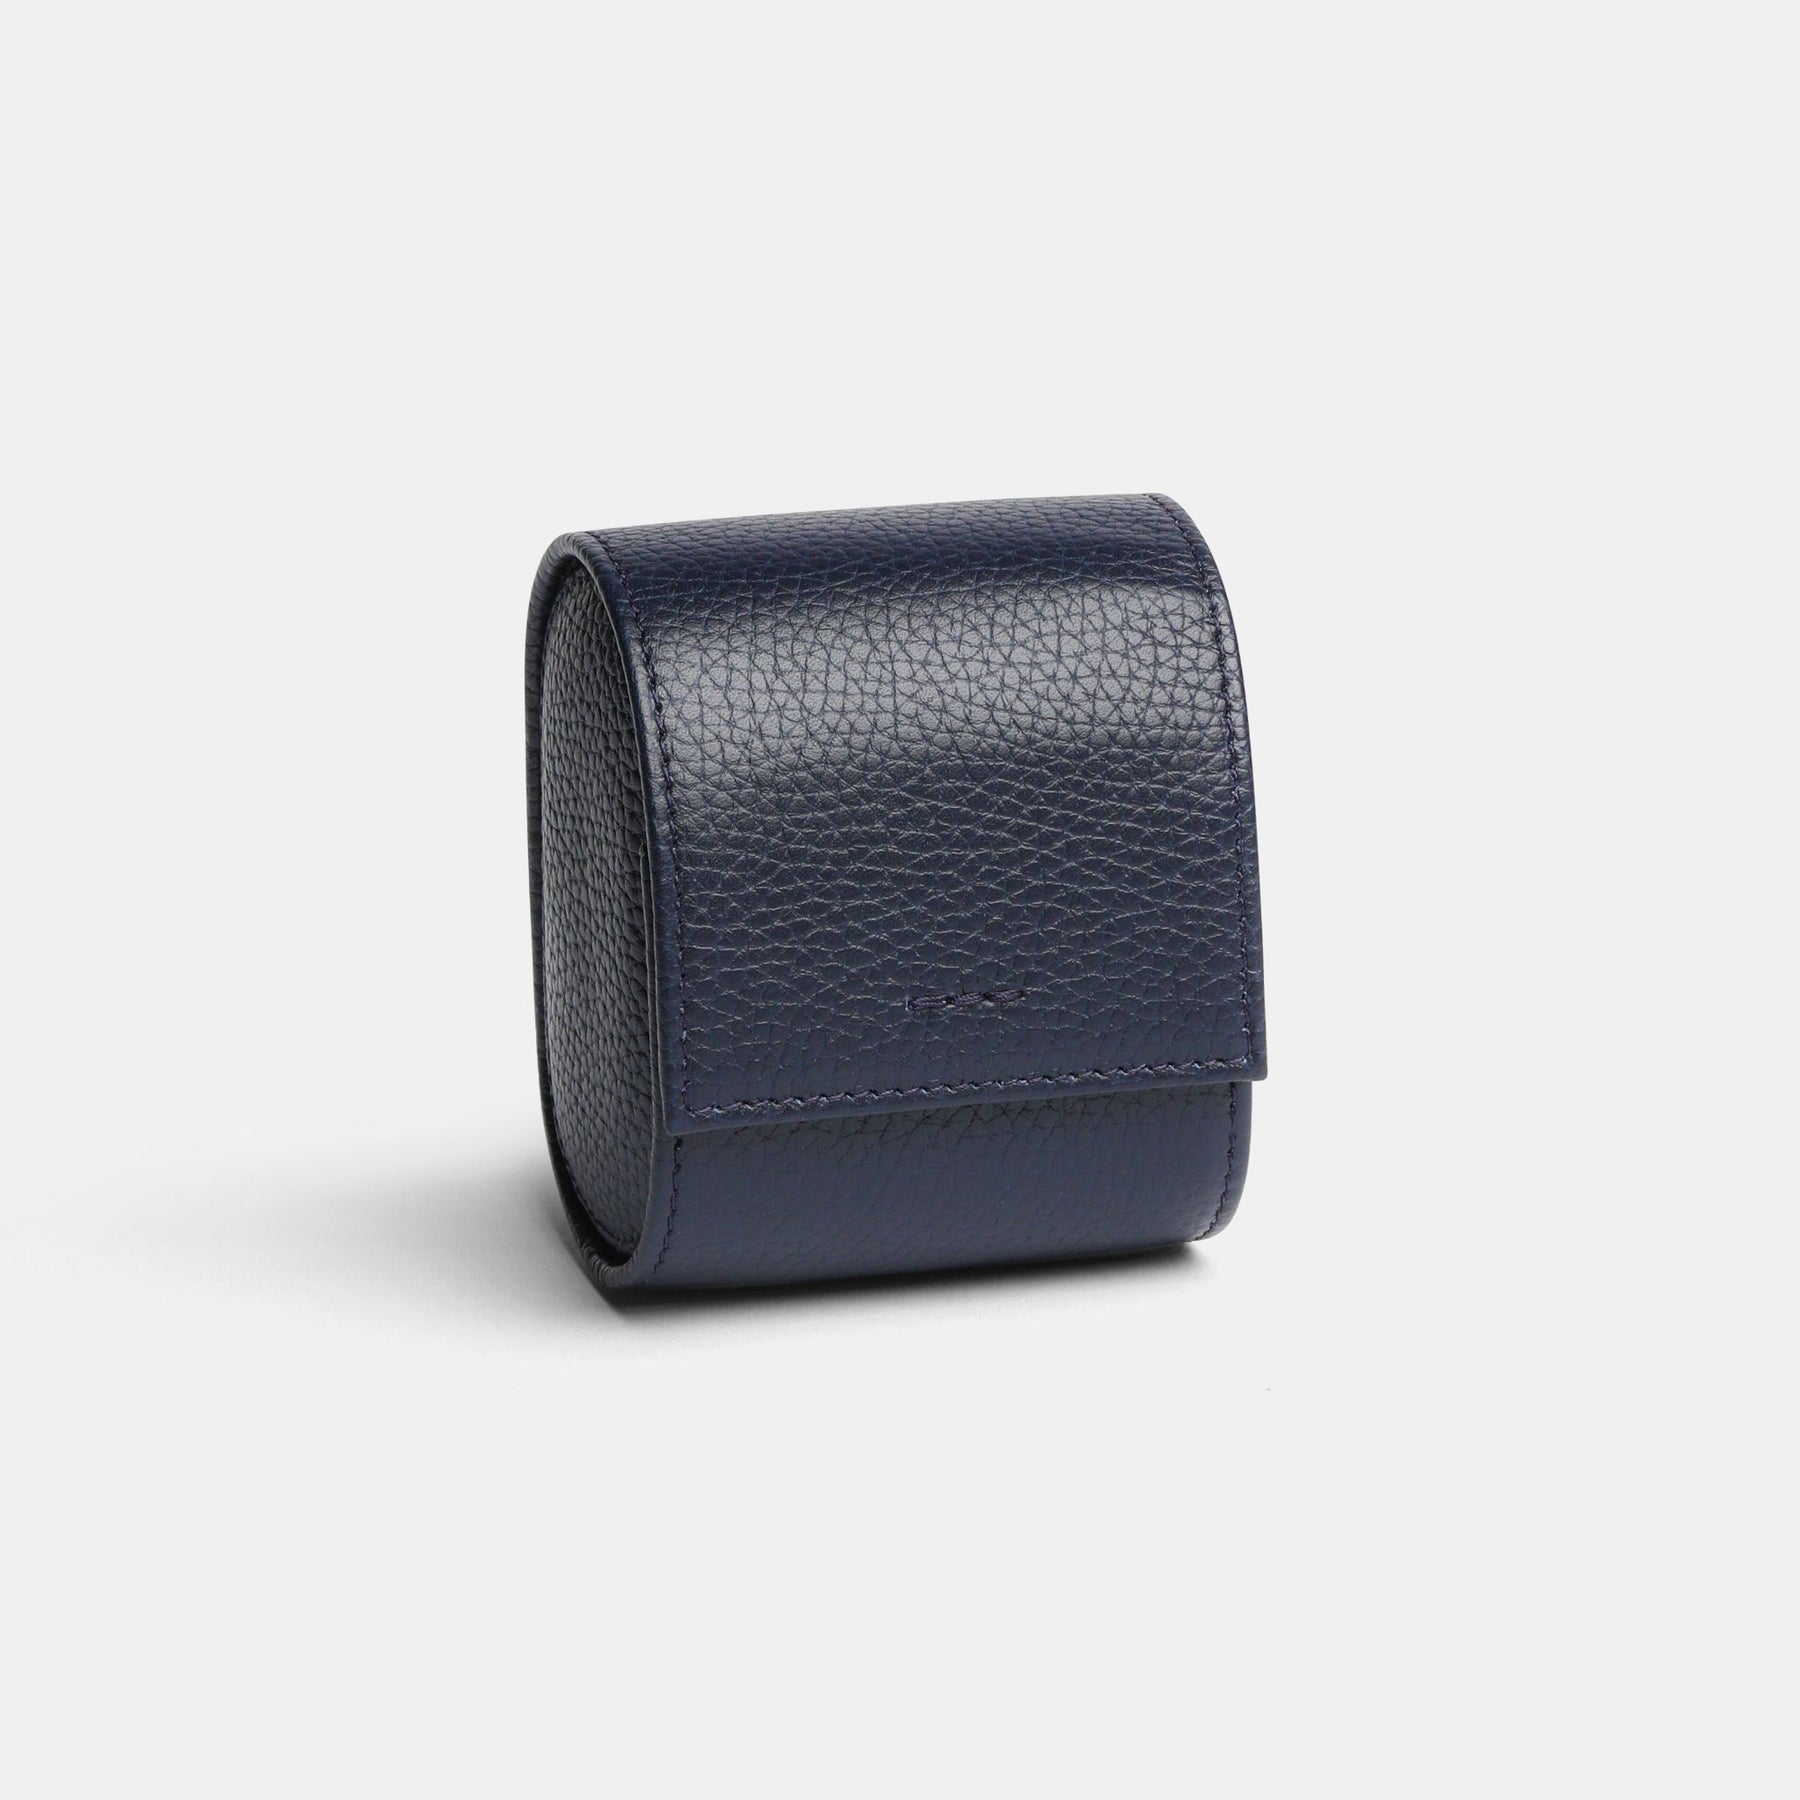 Mare: Blue Leather Watch Roll for 1 Watch